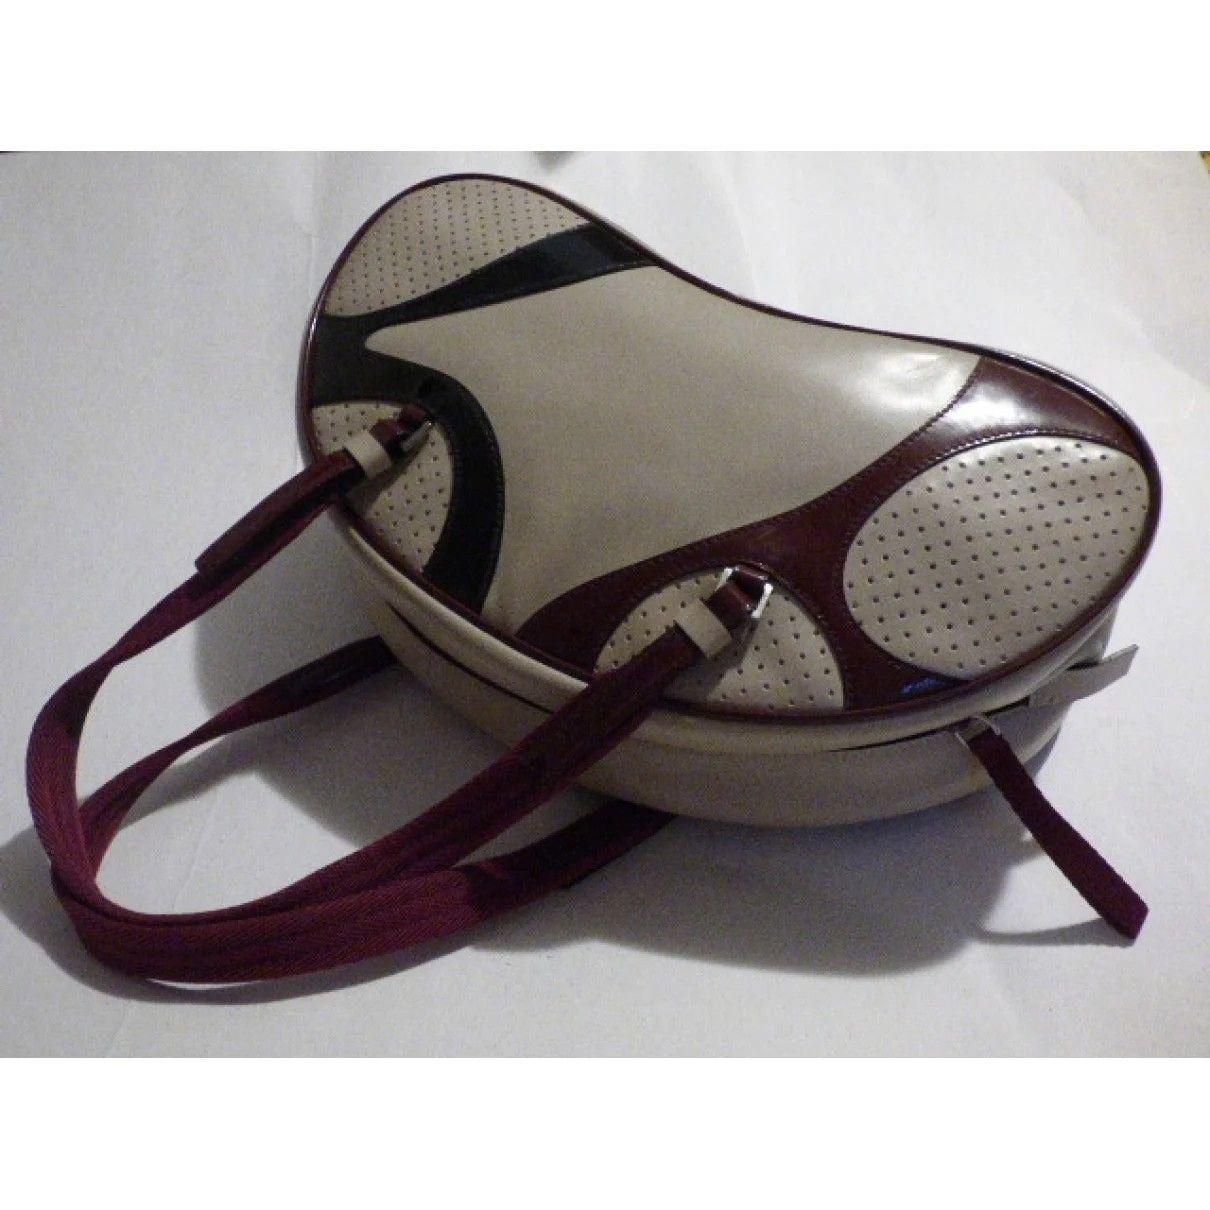 Vintage, 1990s Prada, light taupe leather and burgundy and black patent leather, satchel/ bowling bag style purse in a kidney shape